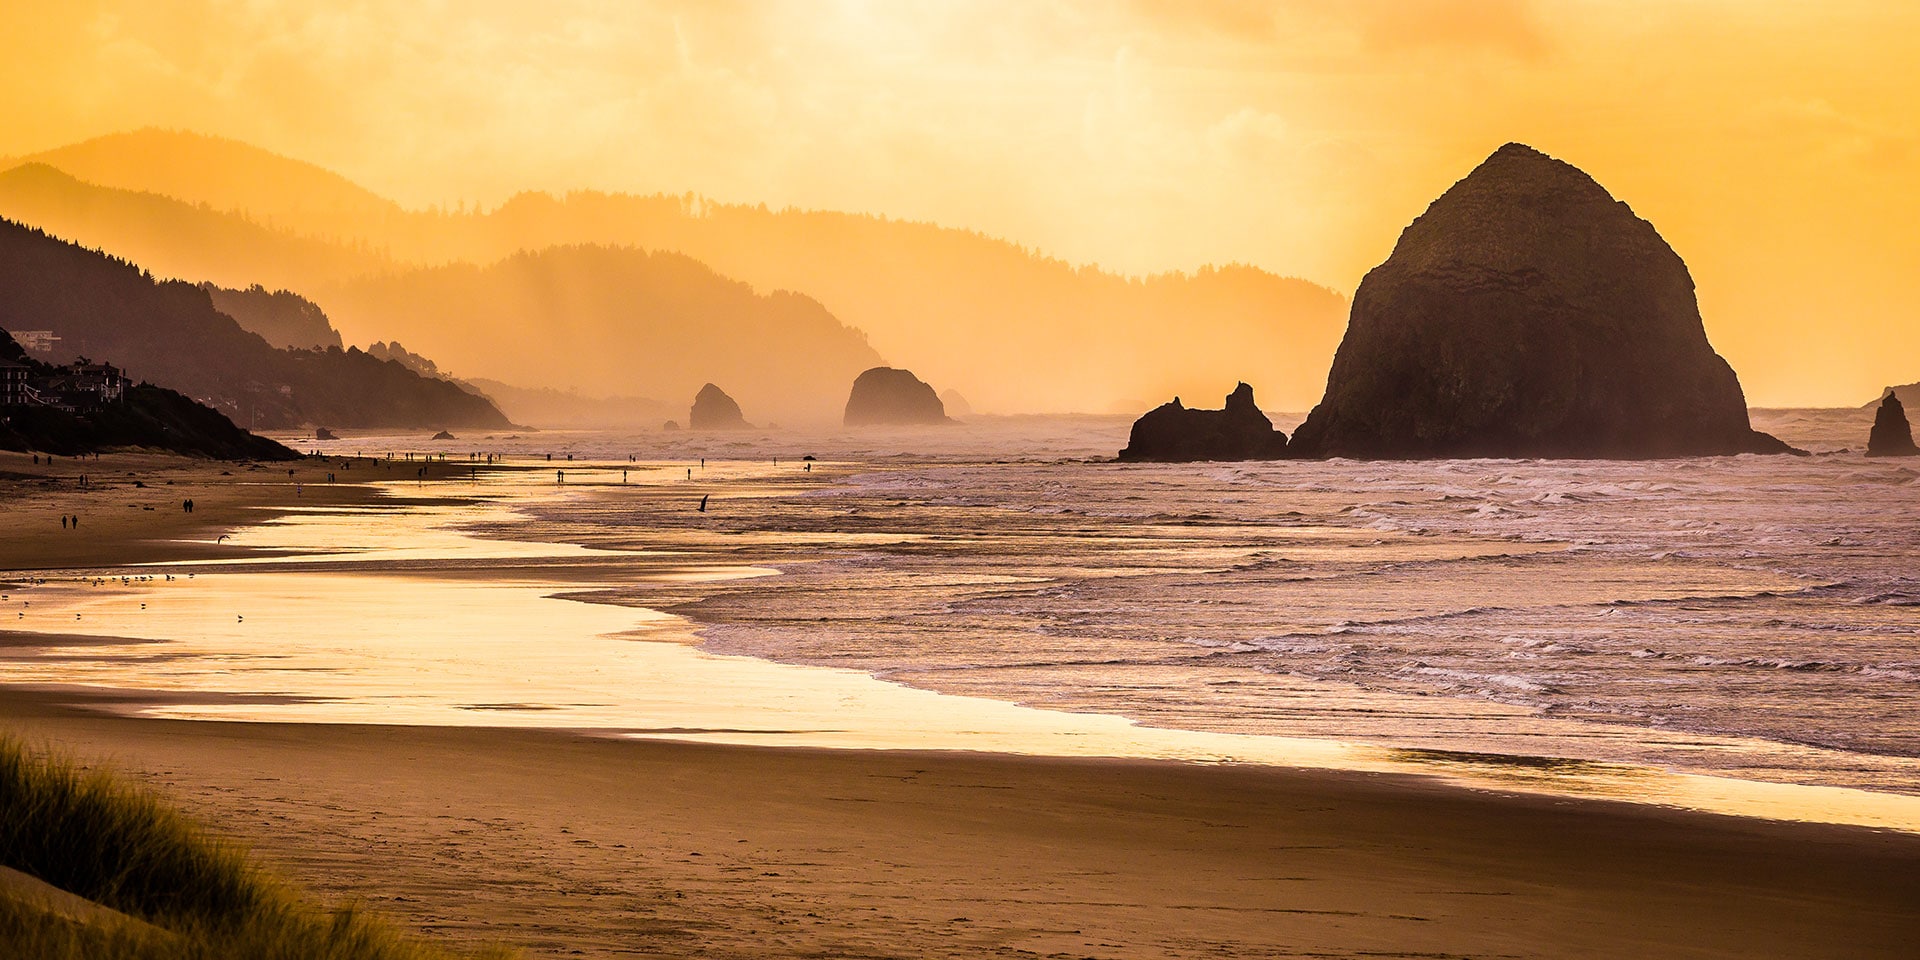 Beaching it on a Budget? Here Are 13 Affordable U.S. Vacation Spots